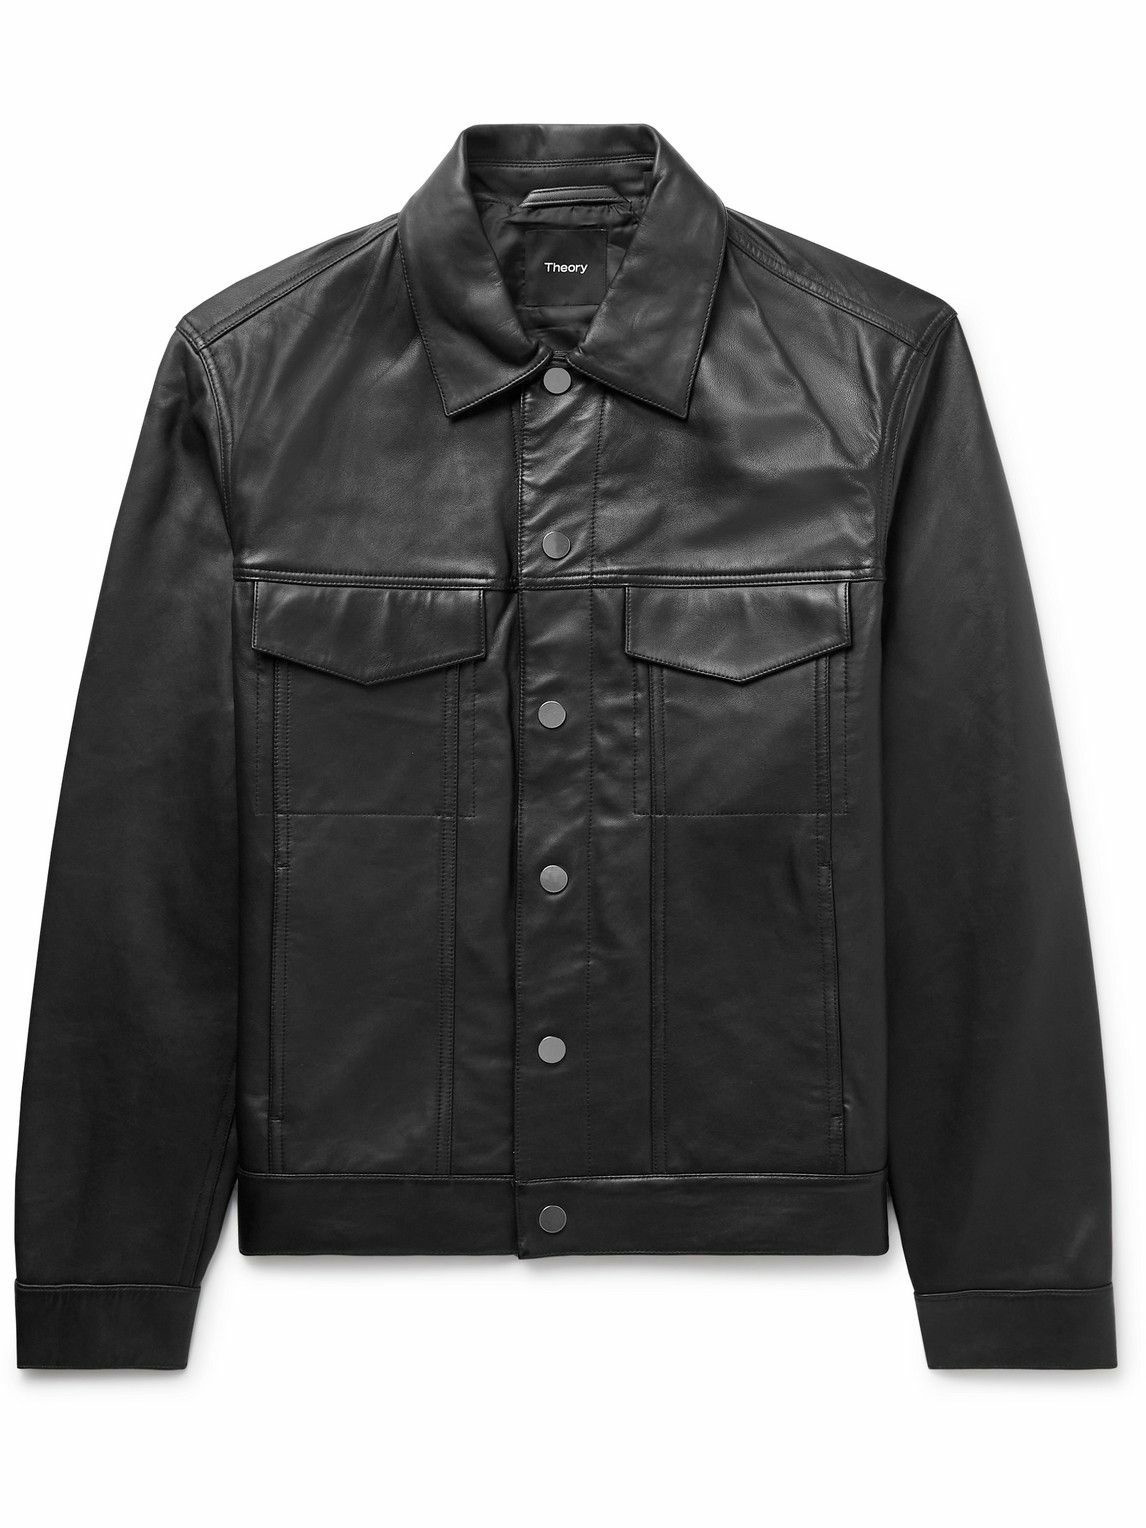 Theory - River Leather Jacket - Black Theory